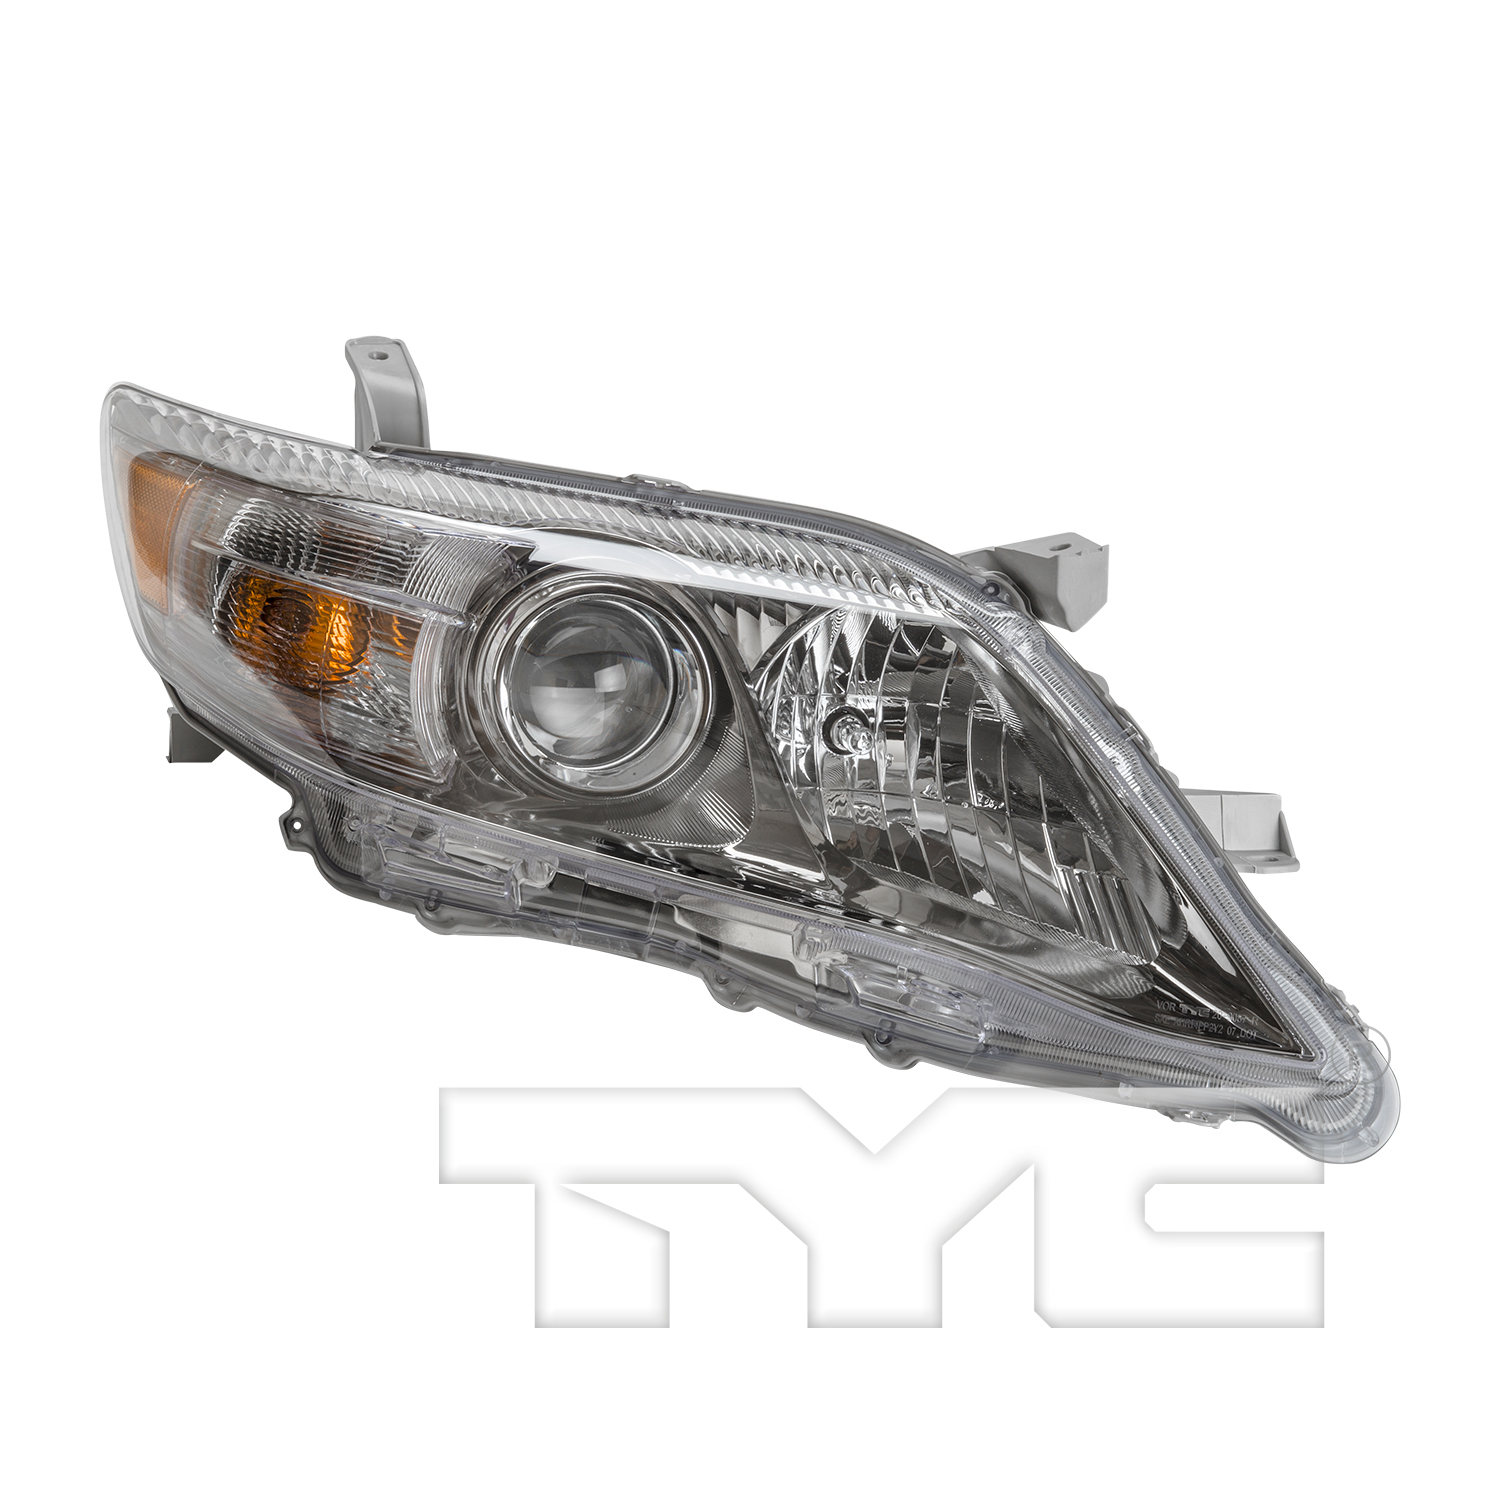 Aftermarket HEADLIGHTS for TOYOTA - CAMRY, CAMRY,10-11,RT Headlamp assy composite